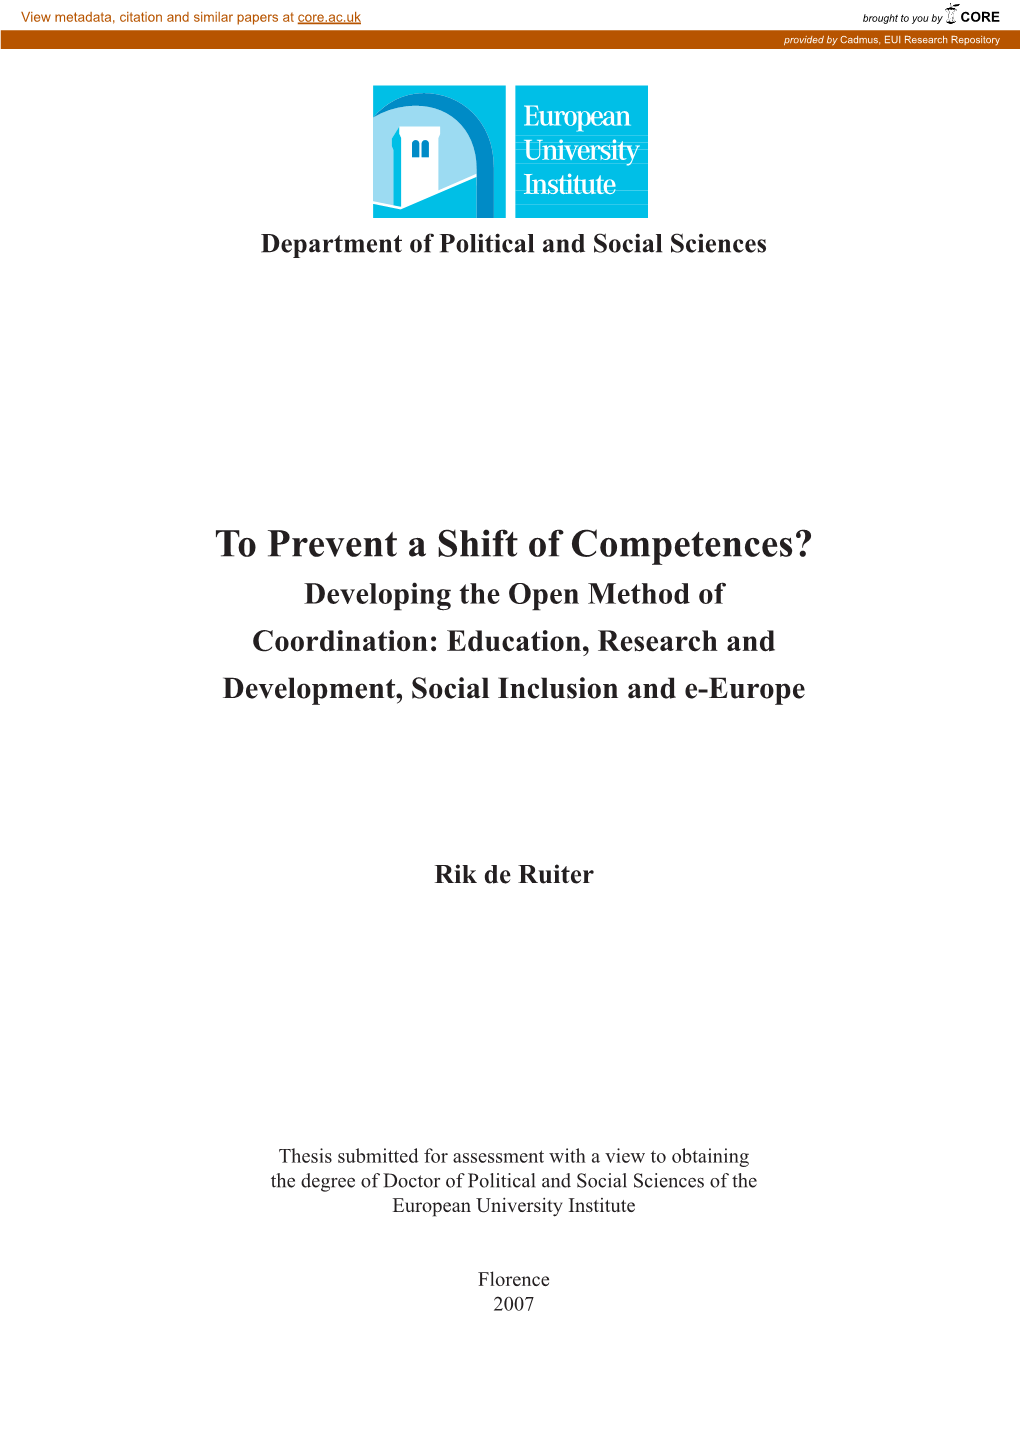 To Prevent a Shift of Competences? Developing the Open Method of Coordination: Education, Research and Development, Social Inclusion and E-Europe